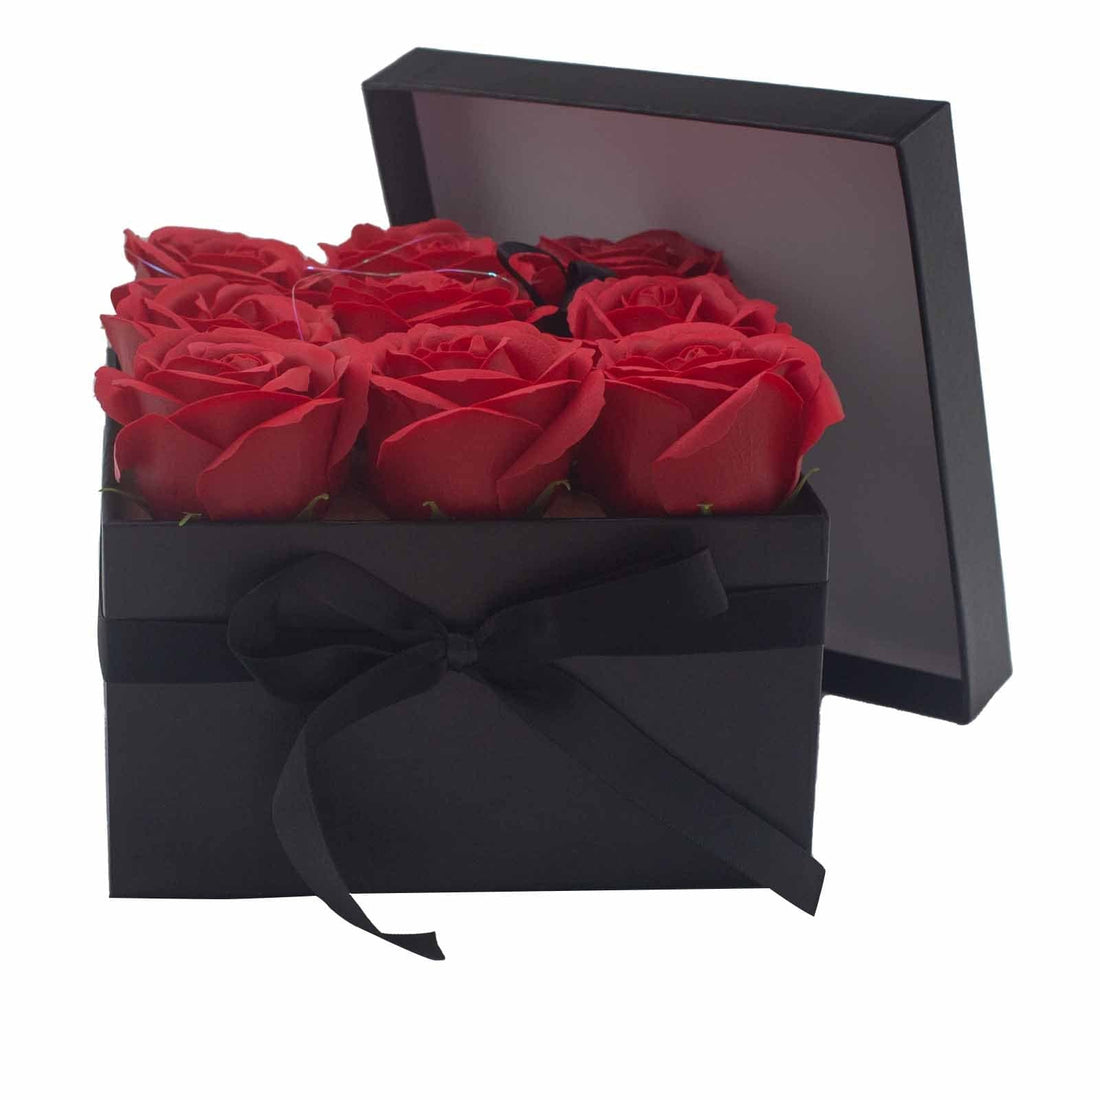 Soap Flower Gift Bouquet - 9 Red Roses - Square - best price from Maltashopper.com GSFB-01